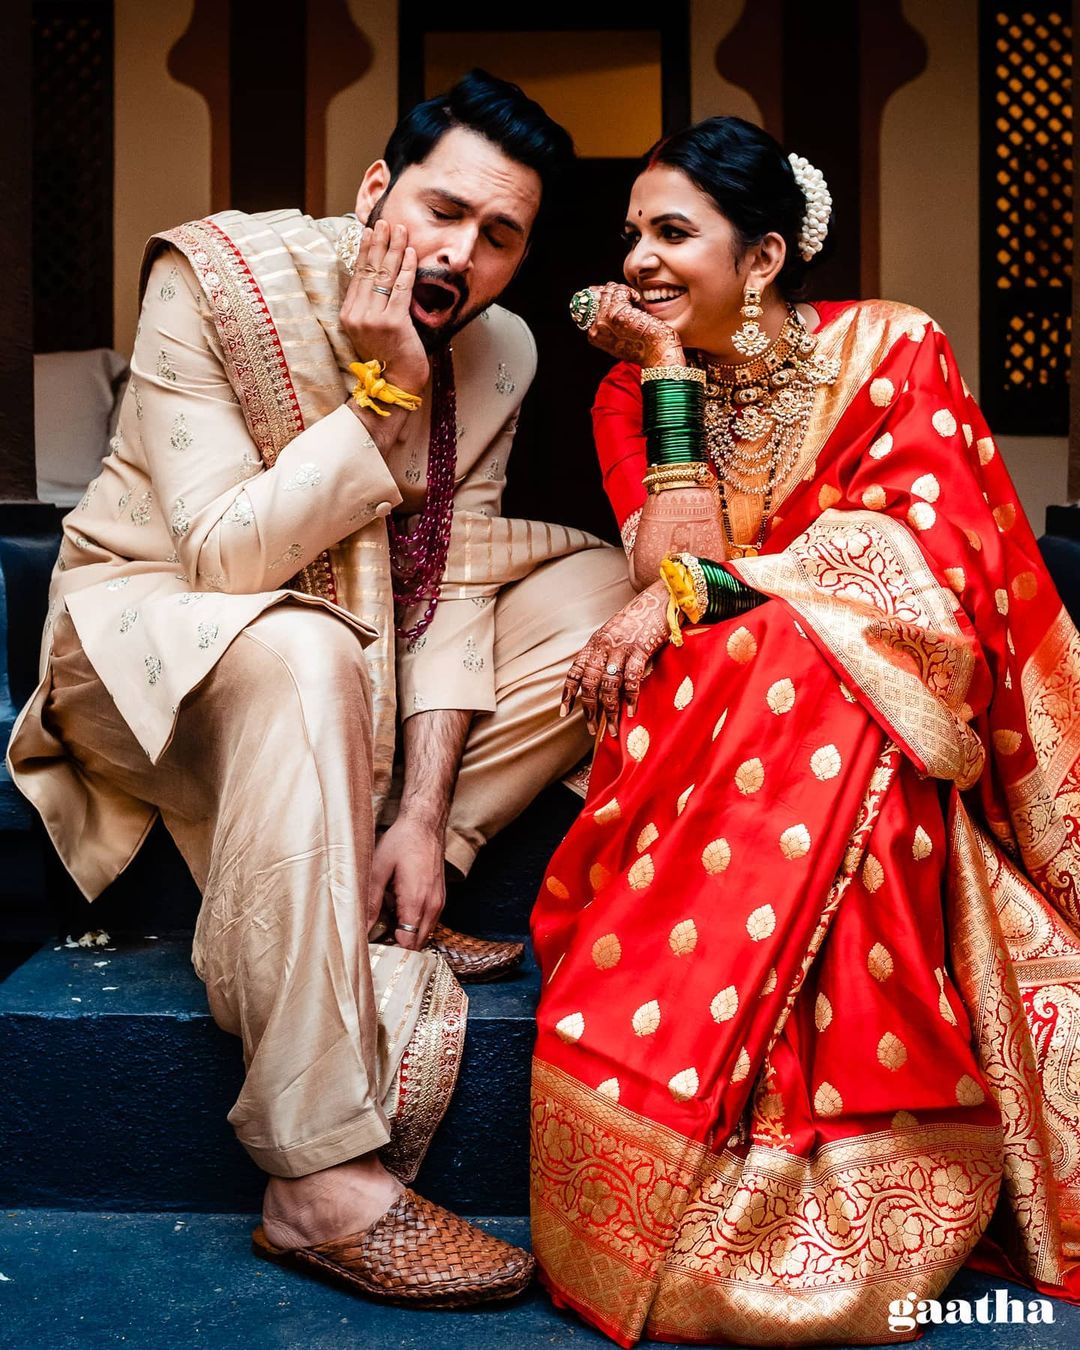 Traditional & Beautiful Marathi Wedding Rituals Which You Need To Know! -  West India Fashion